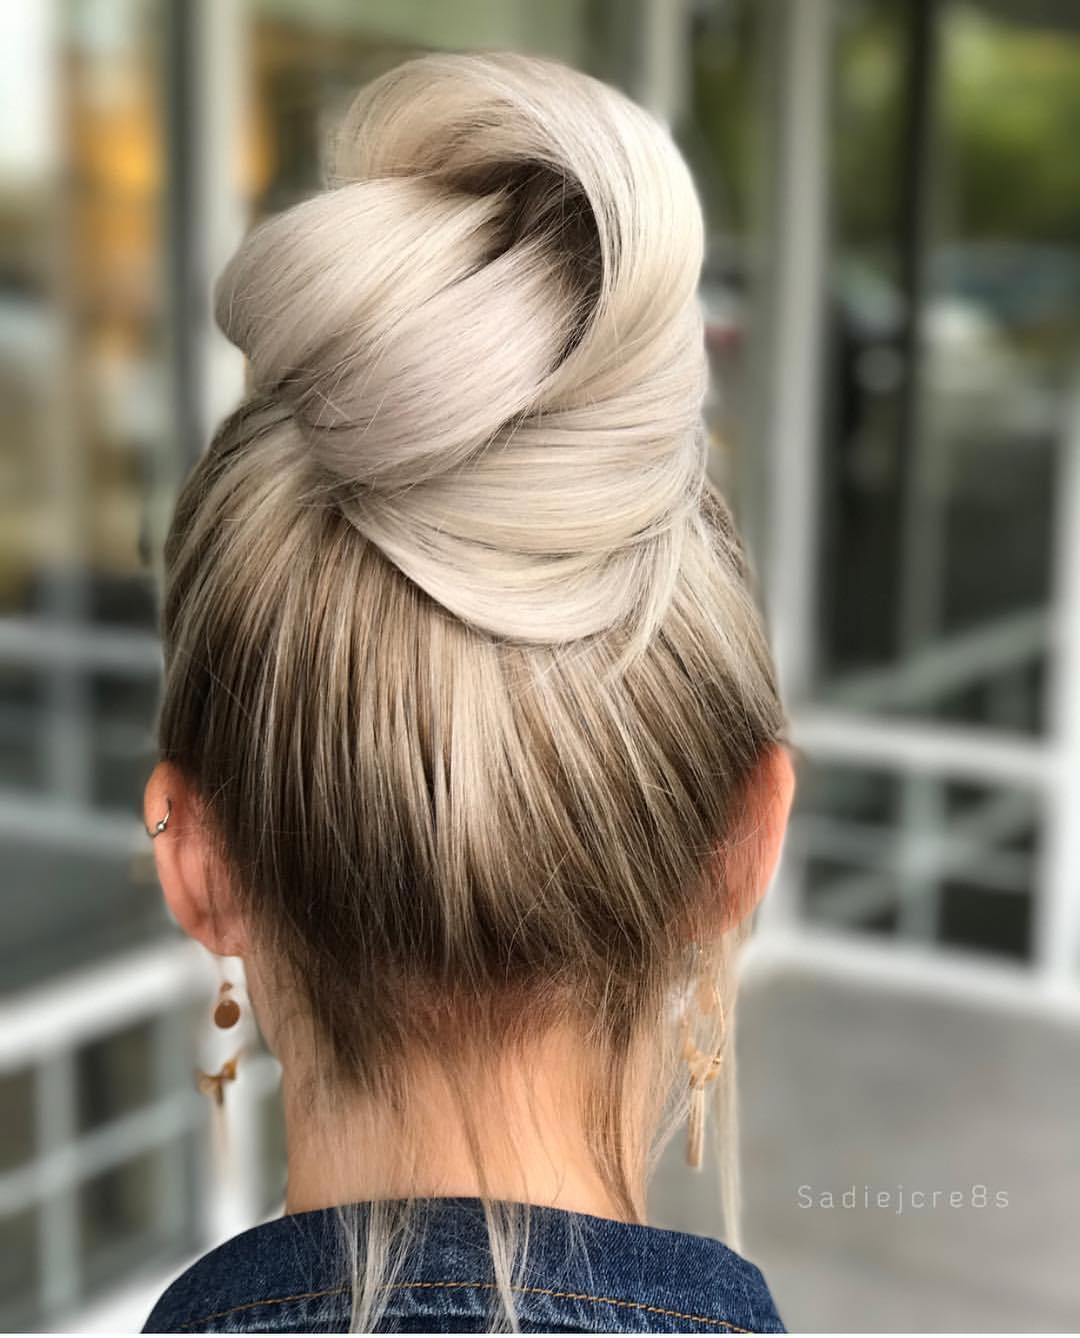 10 Updos for Medium Length Hair from Top Salon Stylists